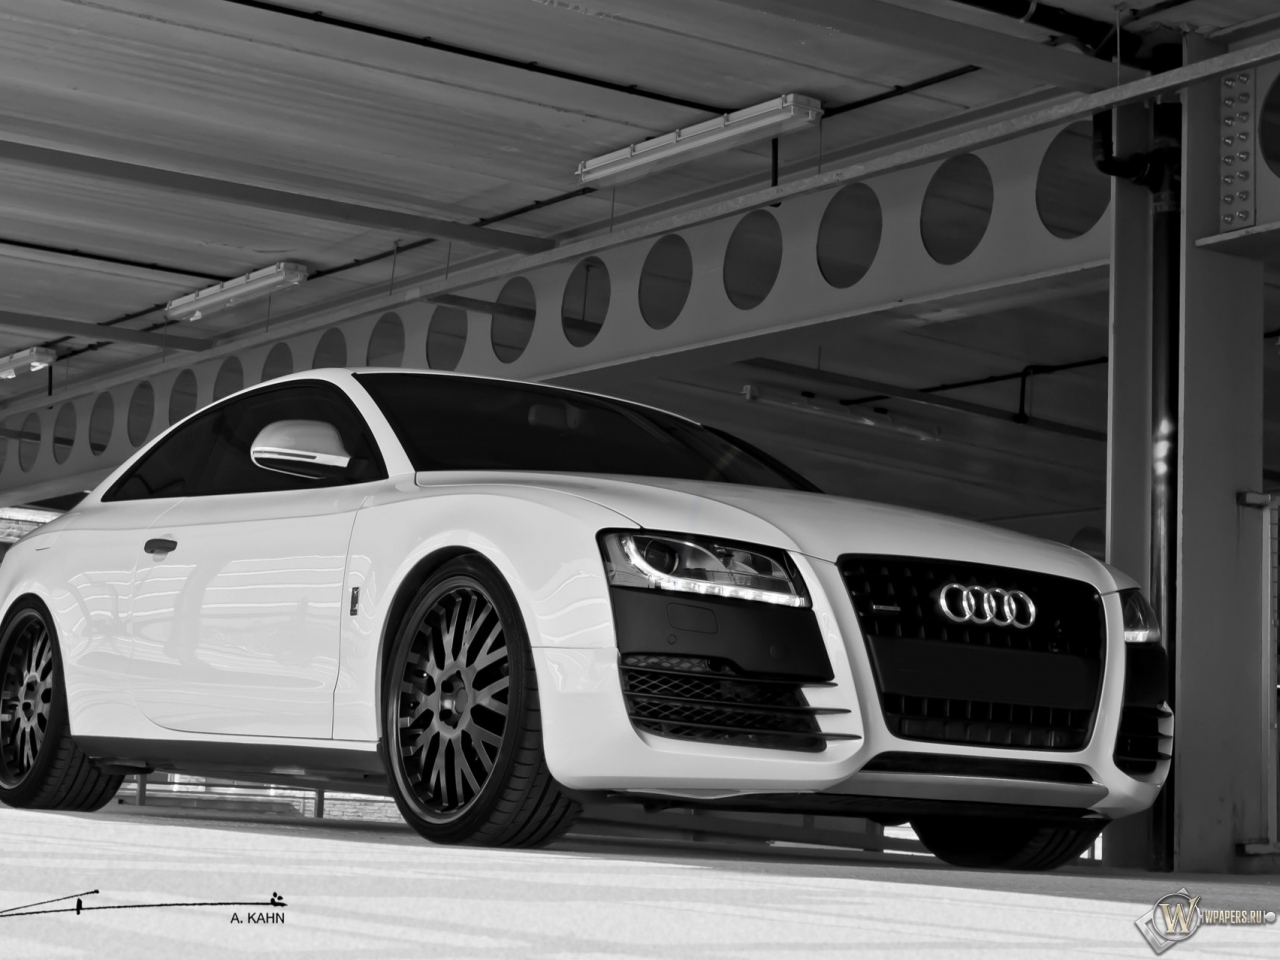 2011 Project Kahn Audi A5 Coupe Sport - Front Angle 1280x960